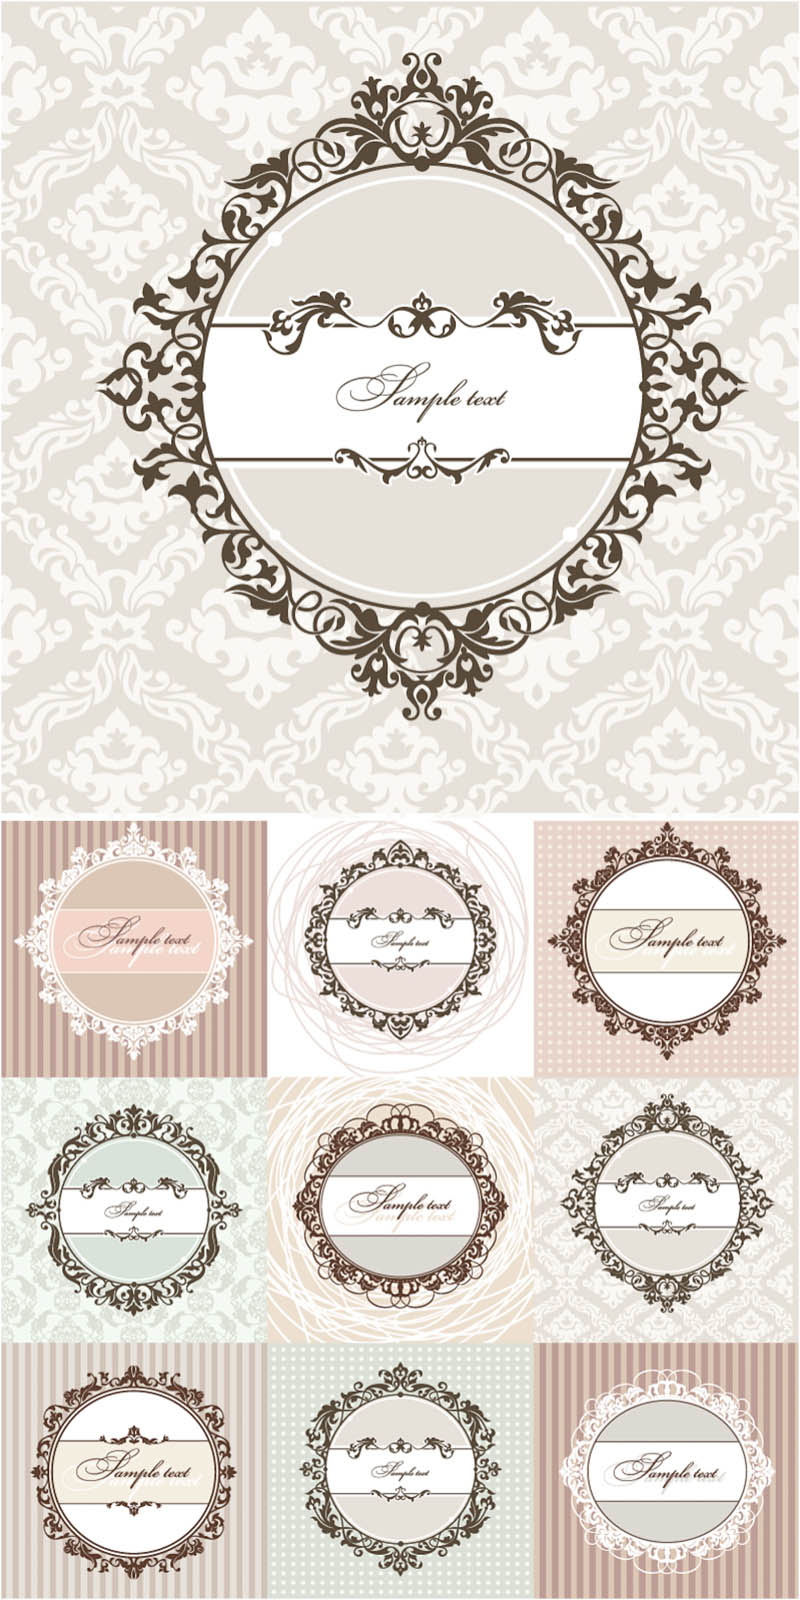 19 Free Vintage Vector Graphics Images